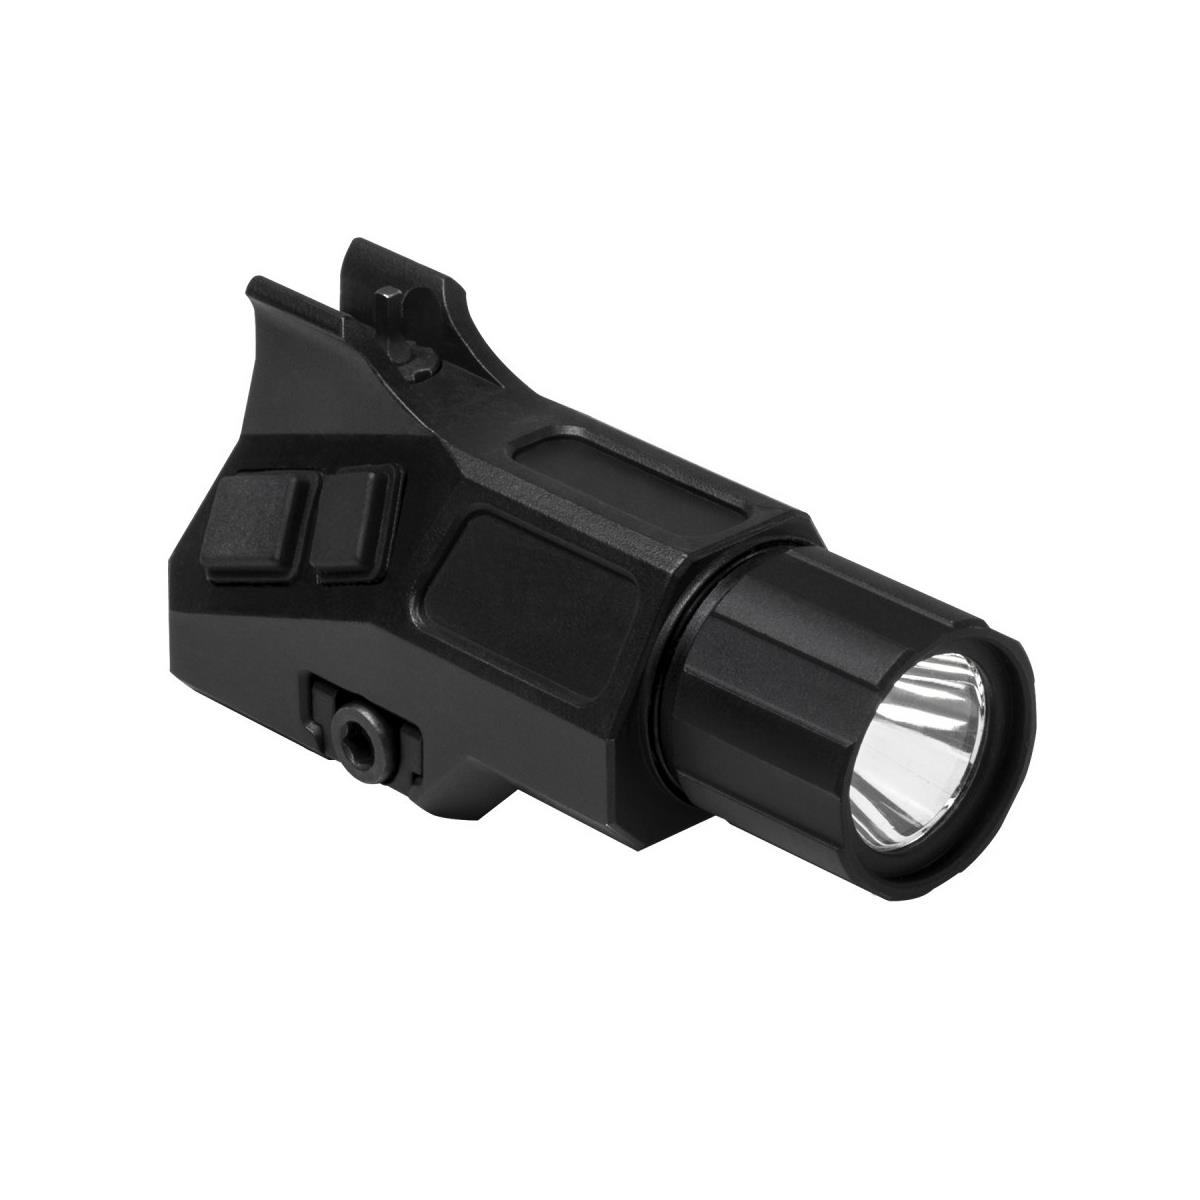 Image of NcSTAR Vism Weapon Flashlight w/A2 Iron Front Sight Post for Flat Tops